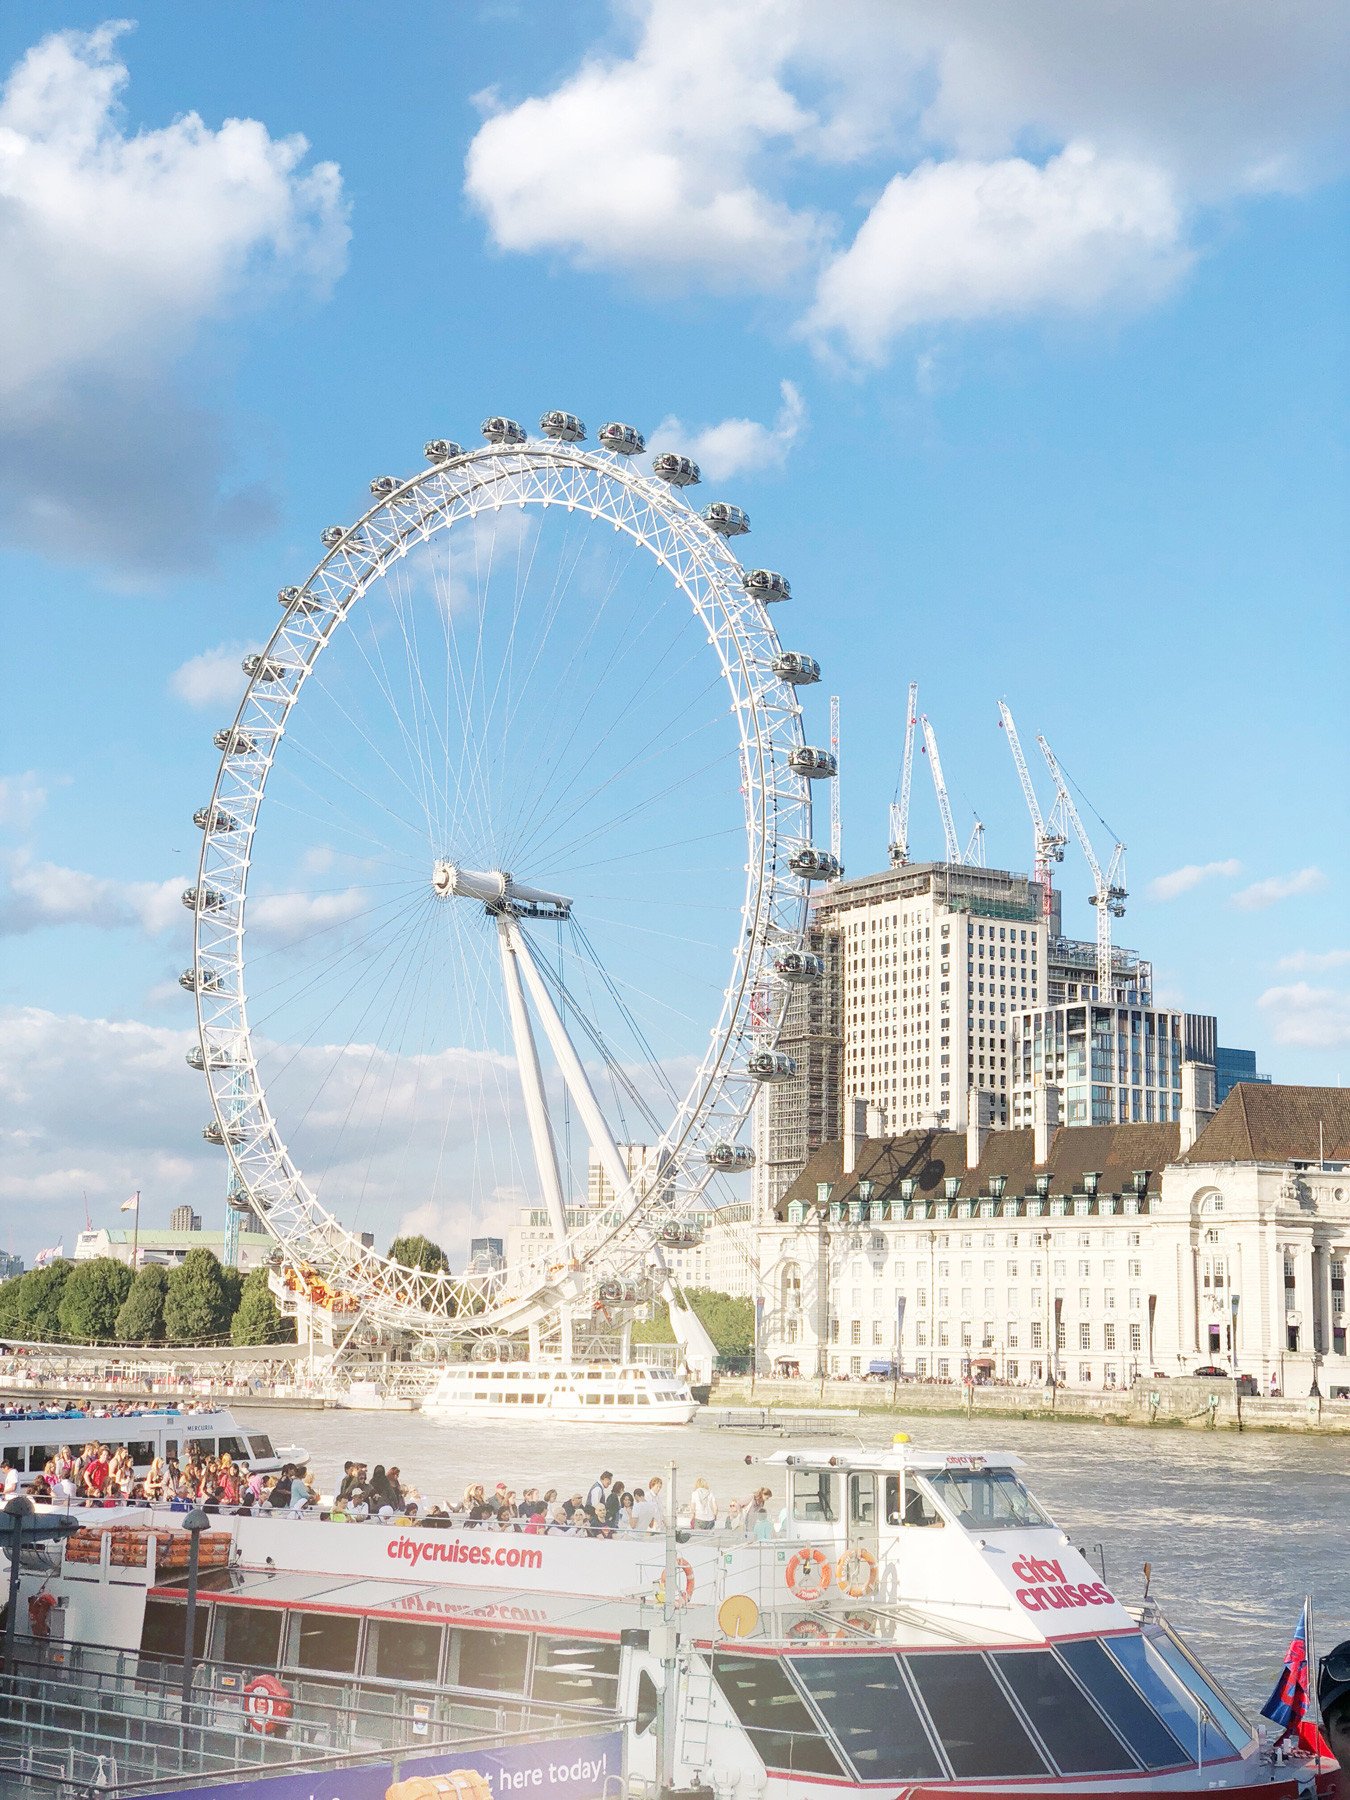 The London Eye and south bank of the Thames